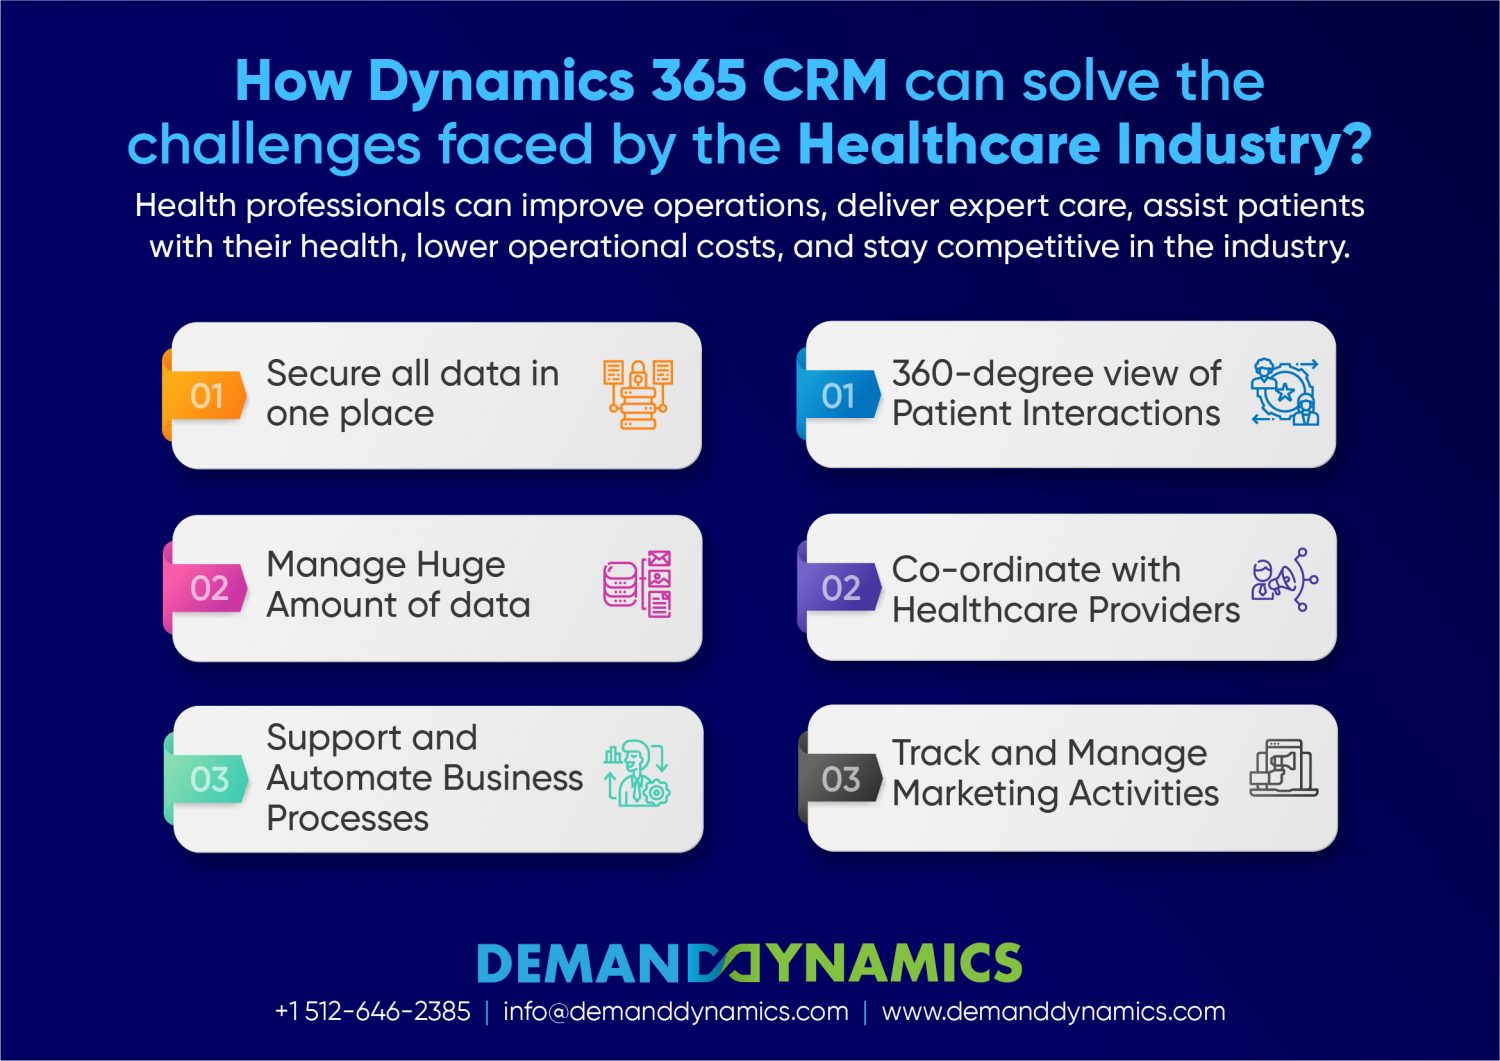 Dynamics 365 for Healthcare